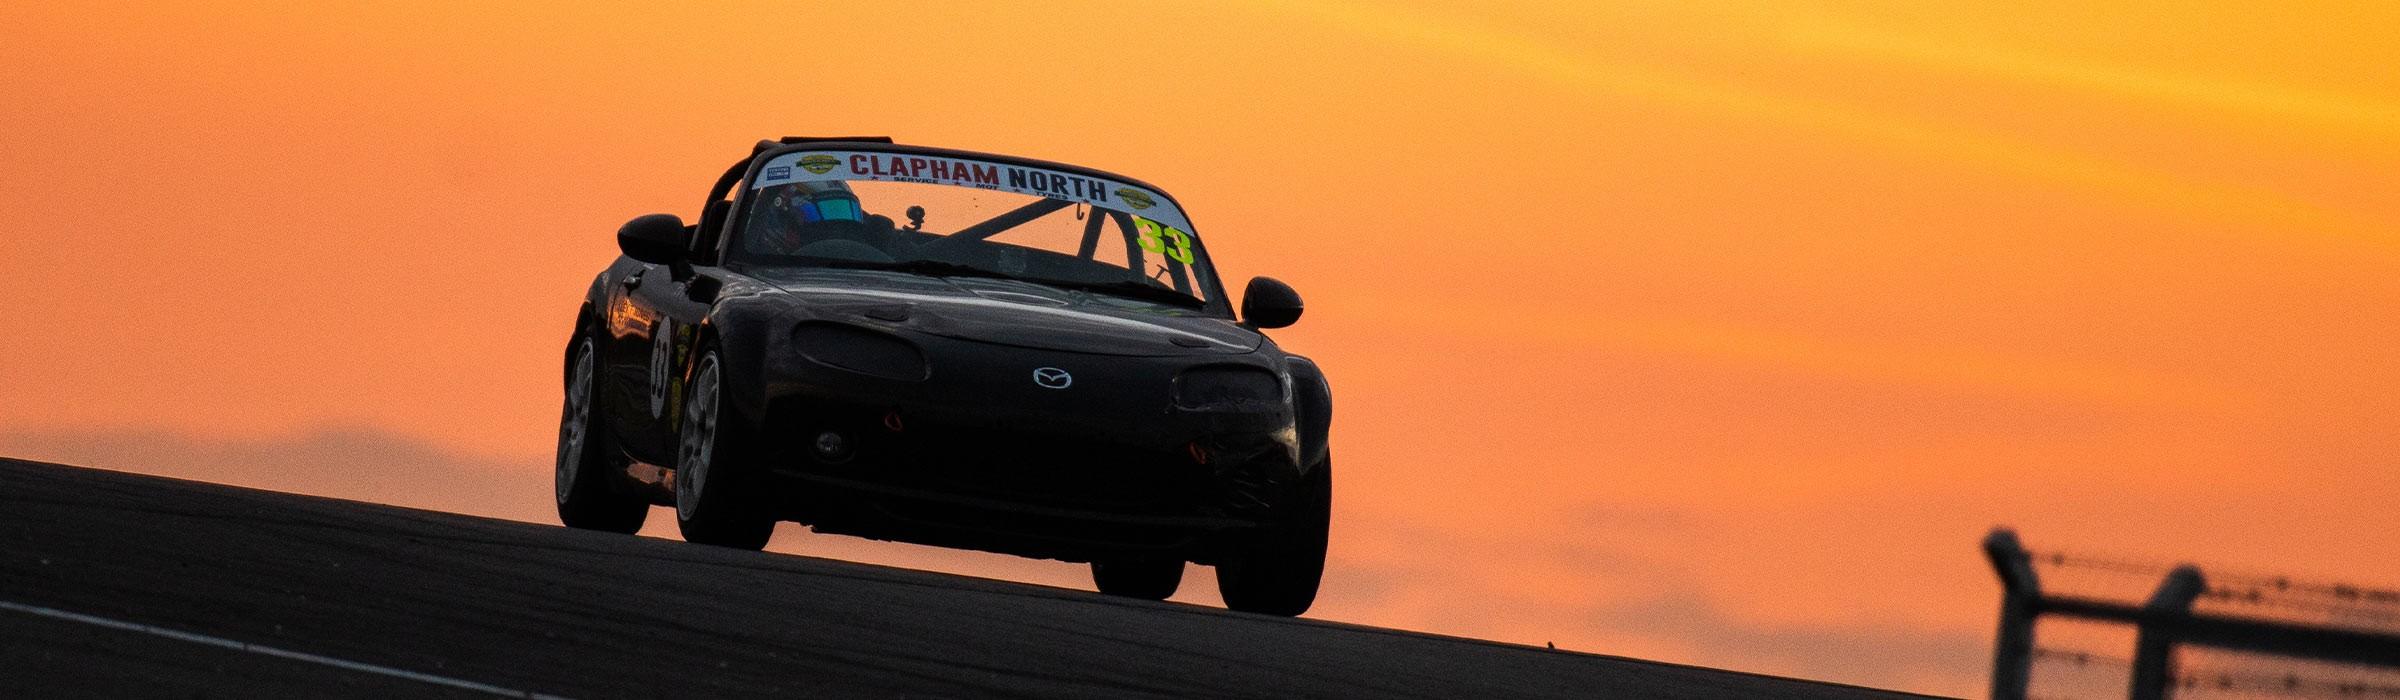 Alex driving his mazda in front of a gorgeous orange sunset horizon!